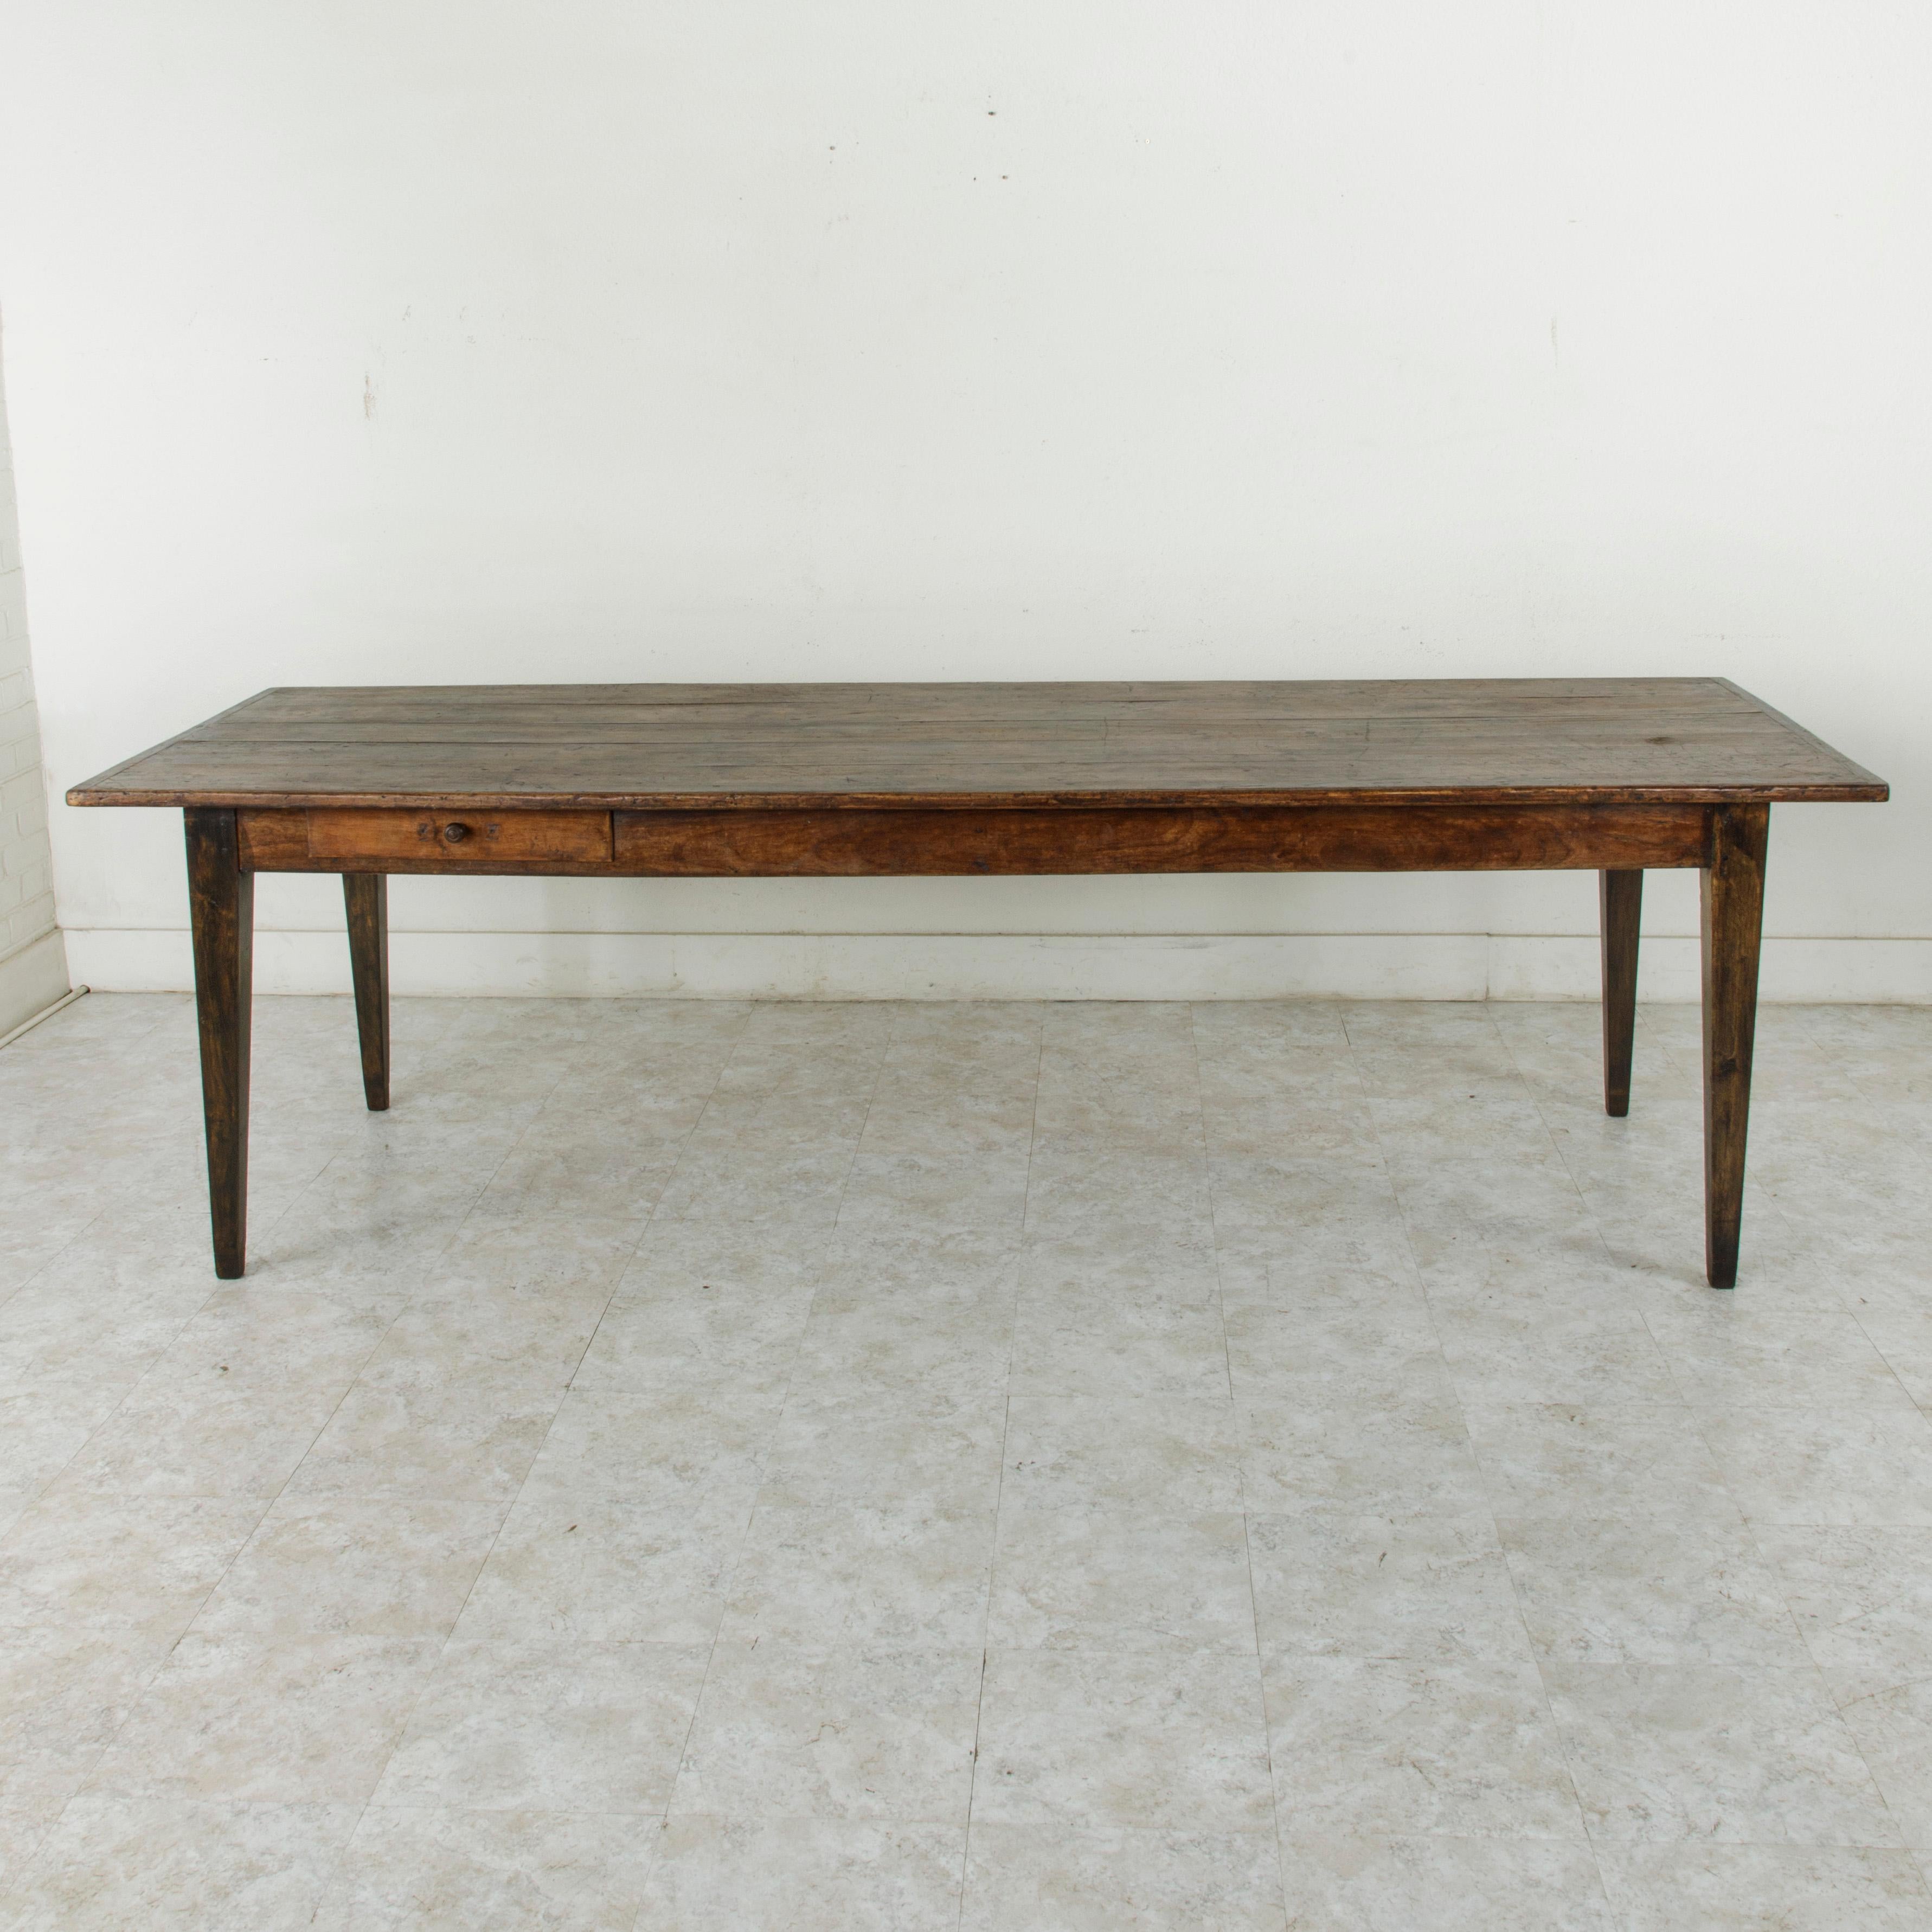 This turn of the 20th century artisan-made farm table is from the region of Le Perche, a Sub-region of Normandy, France. Its oak top is constructed of five planks of wood and measures 103 inches long and 36 inches wide. A pull out / pull-out cutting